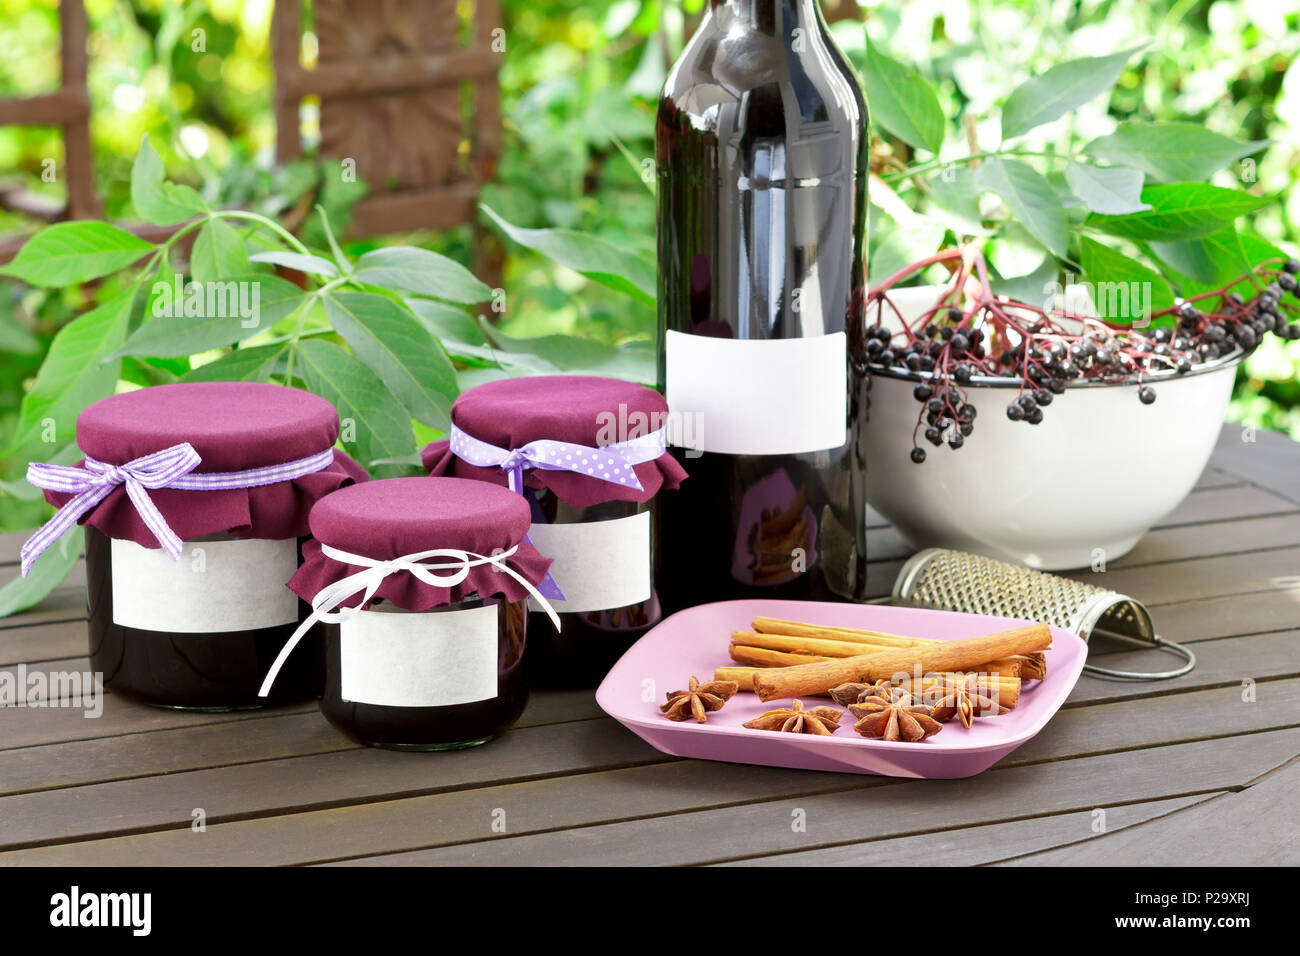 Homemade elderberry jelly and juice in a bottle and glass jars with elderberries on a wooden table outdoors in front of green leaves, copy space. Stock Photo